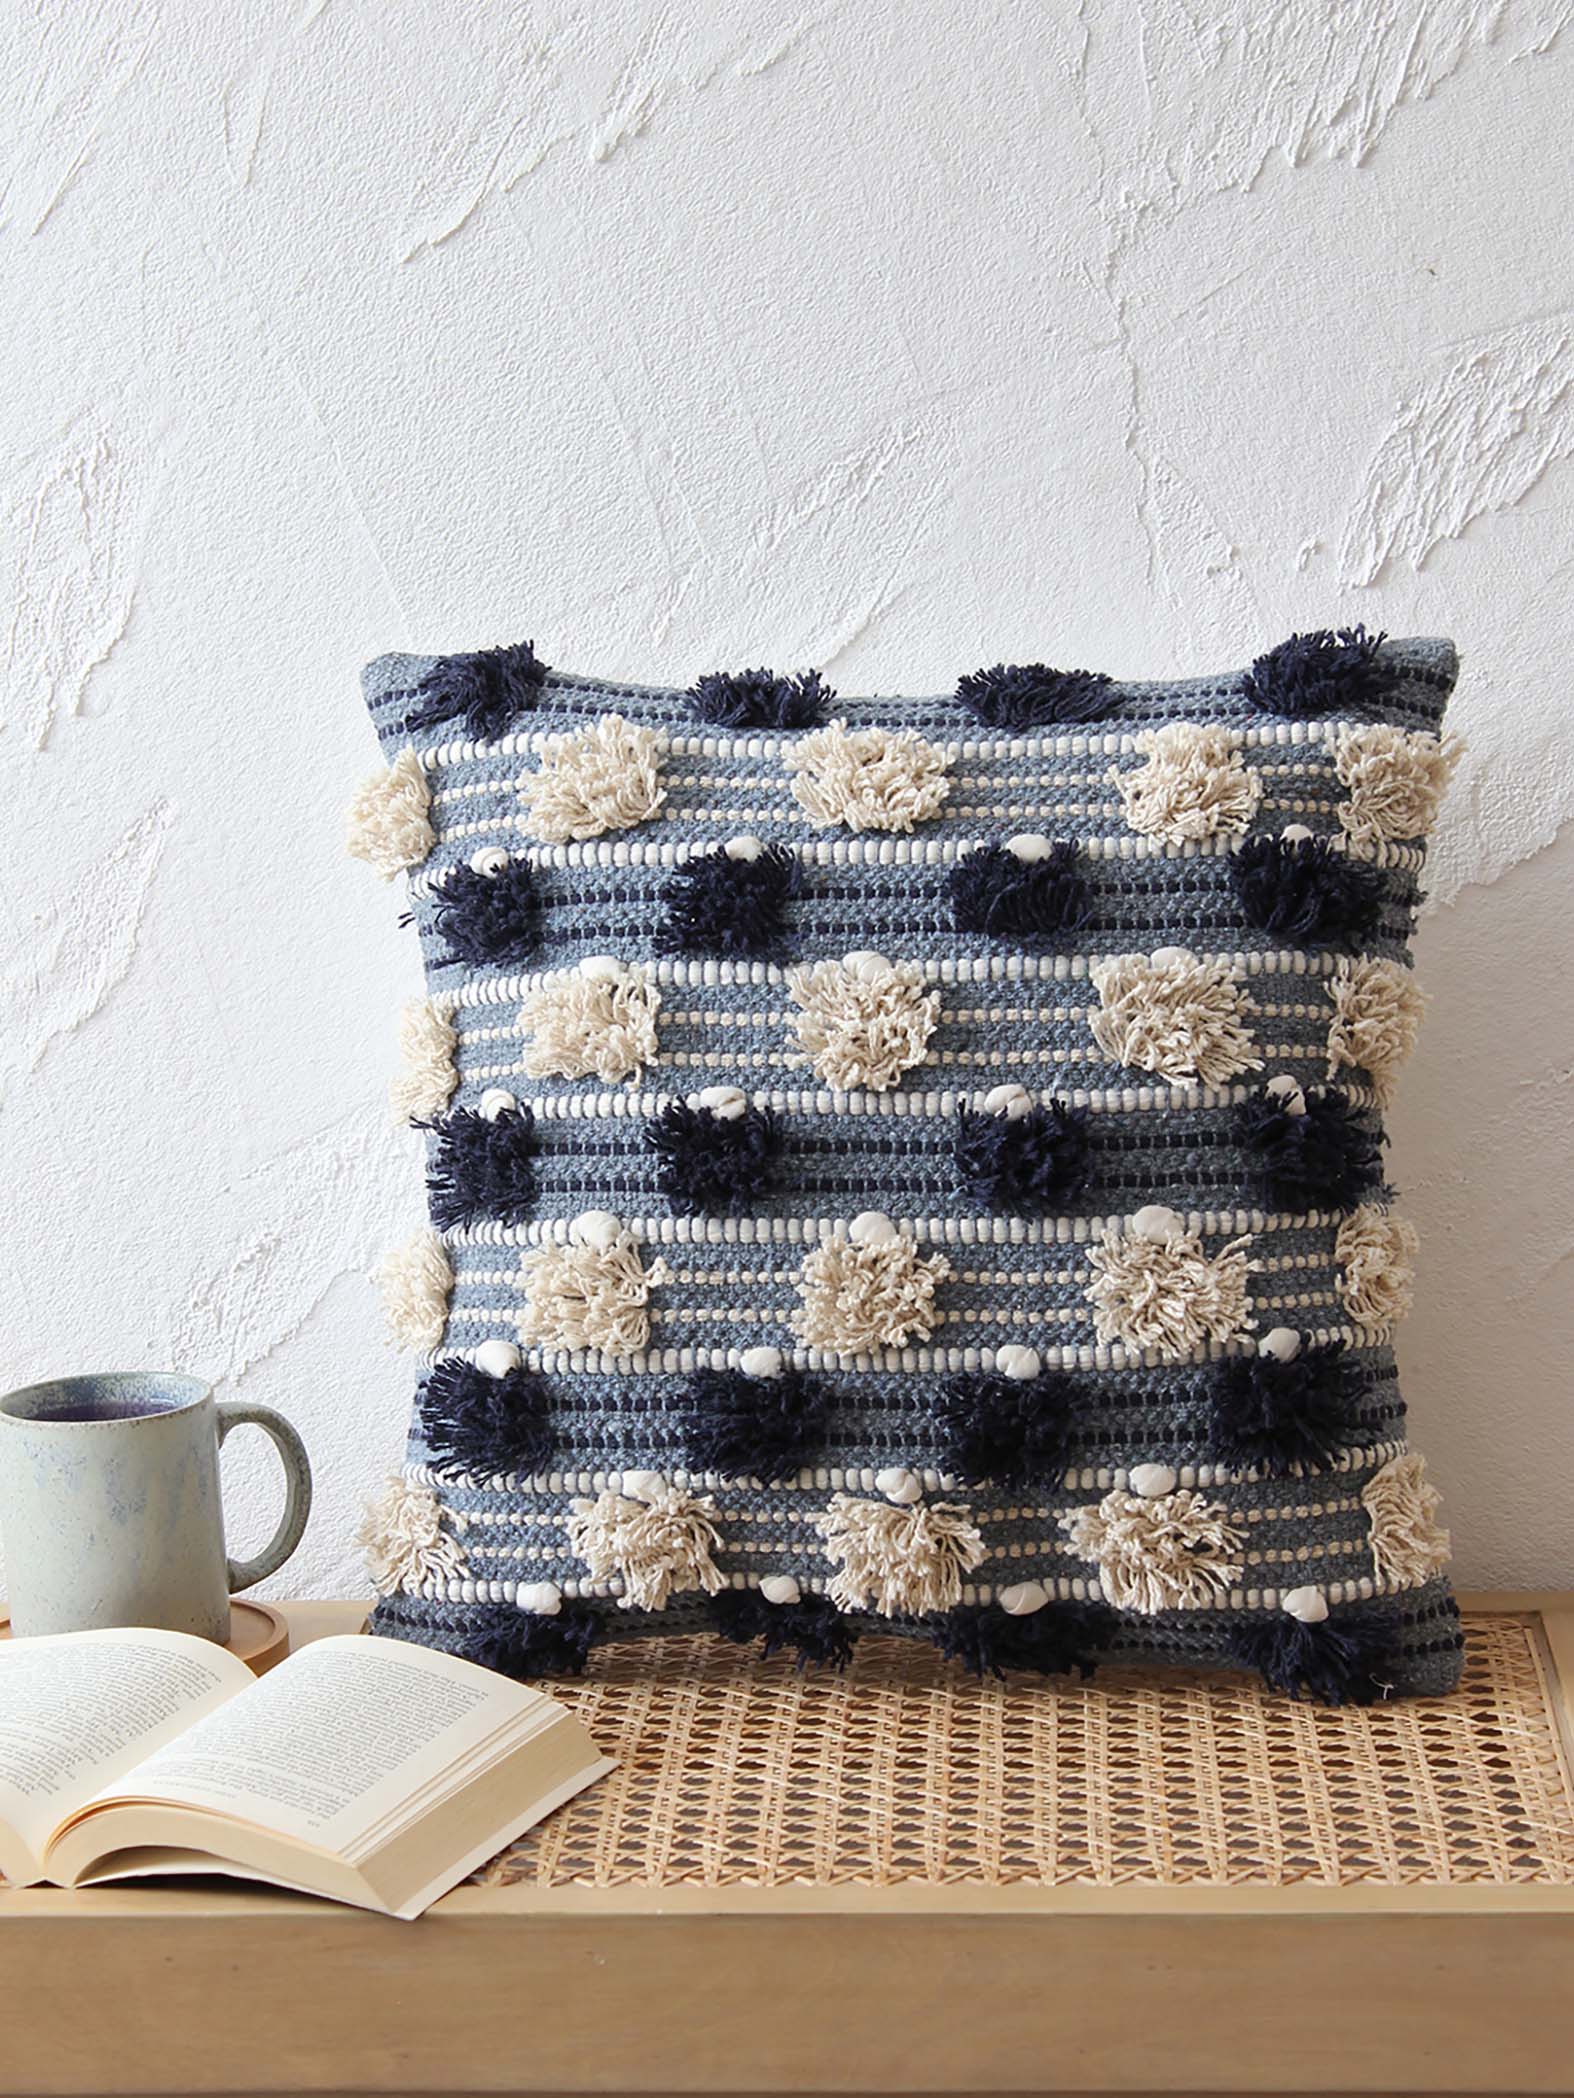 Reshe Cushion Cover By House This